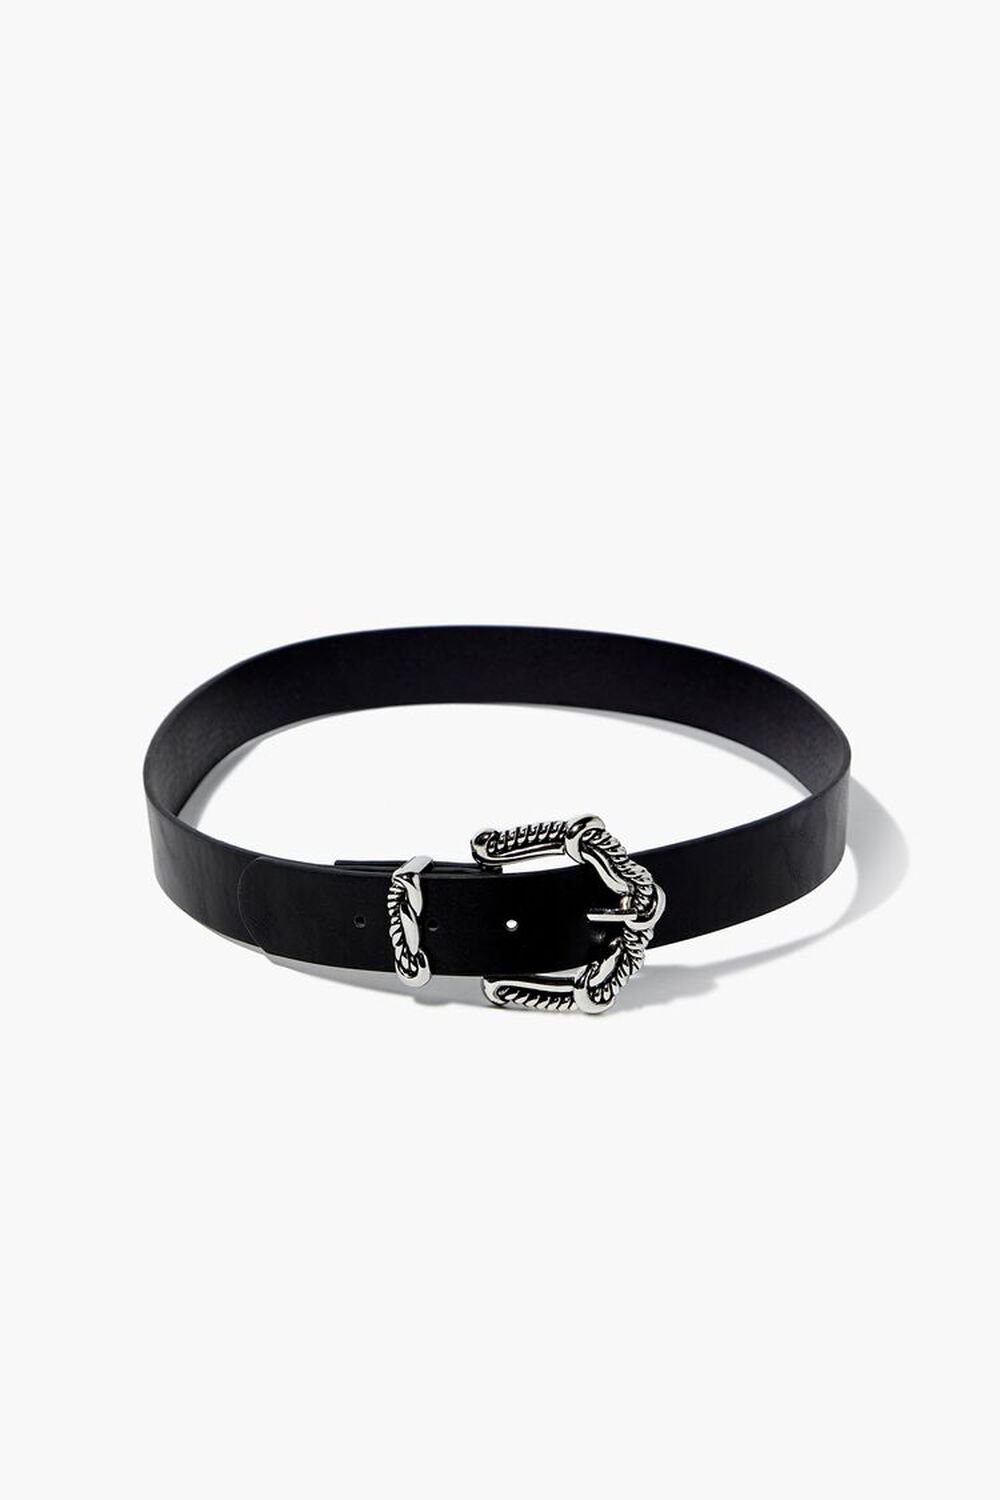 BLACK/SILVER Faux Leather Twisted Buckle Belt, image 1